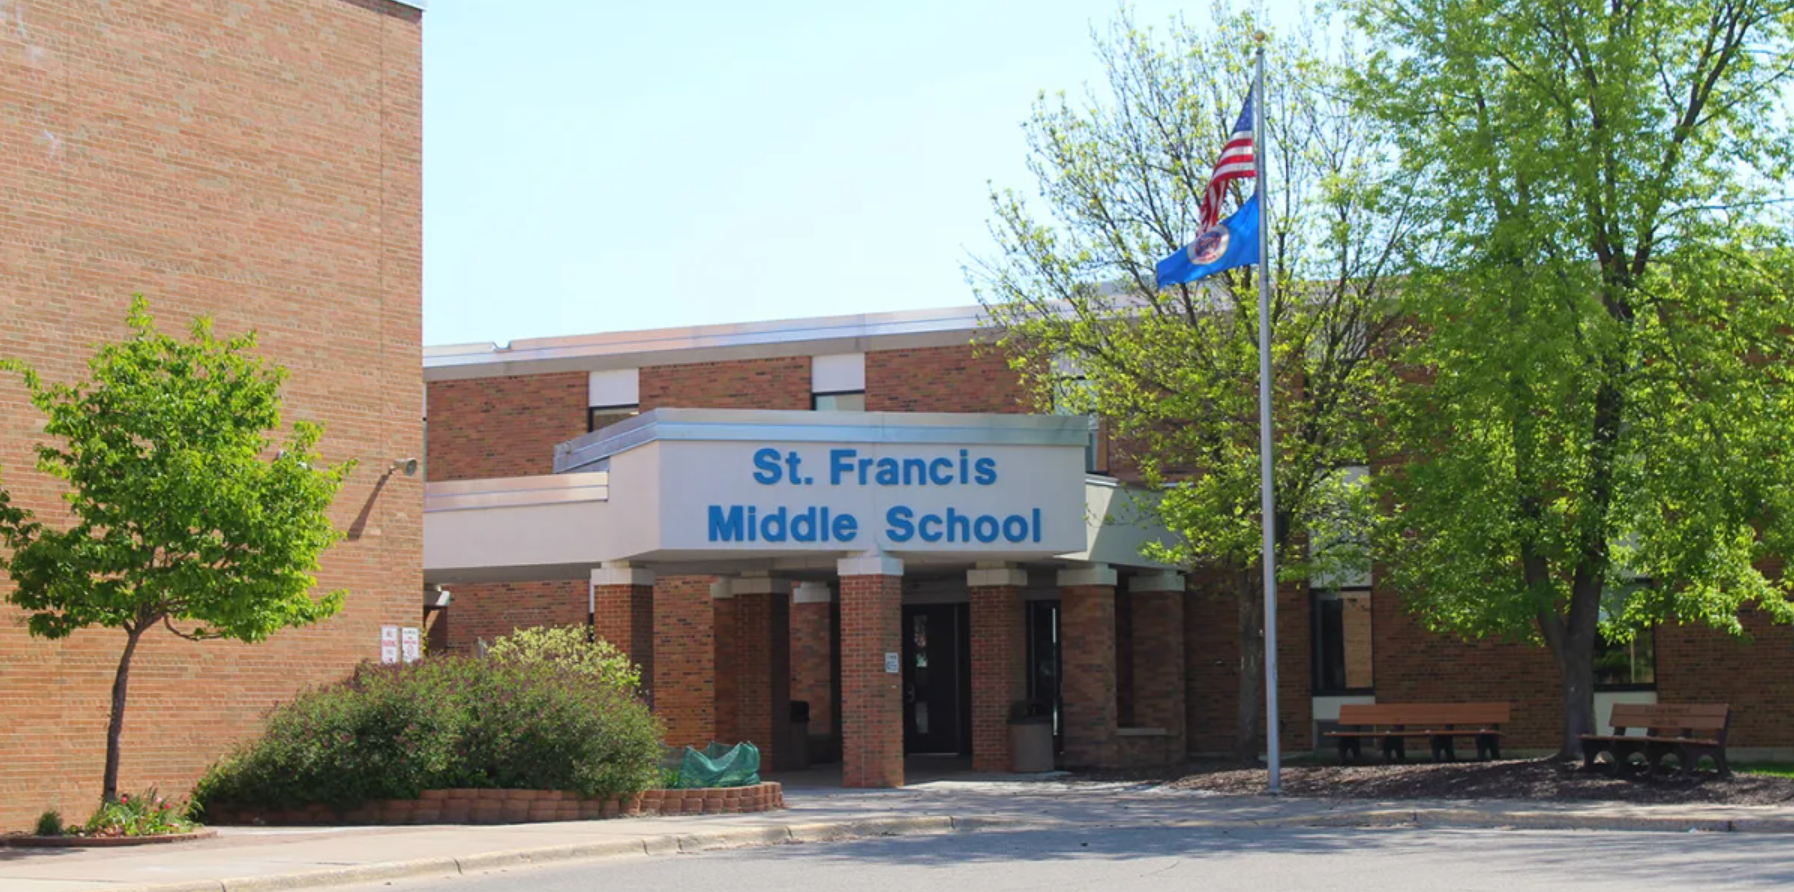 St. Francis Middle School